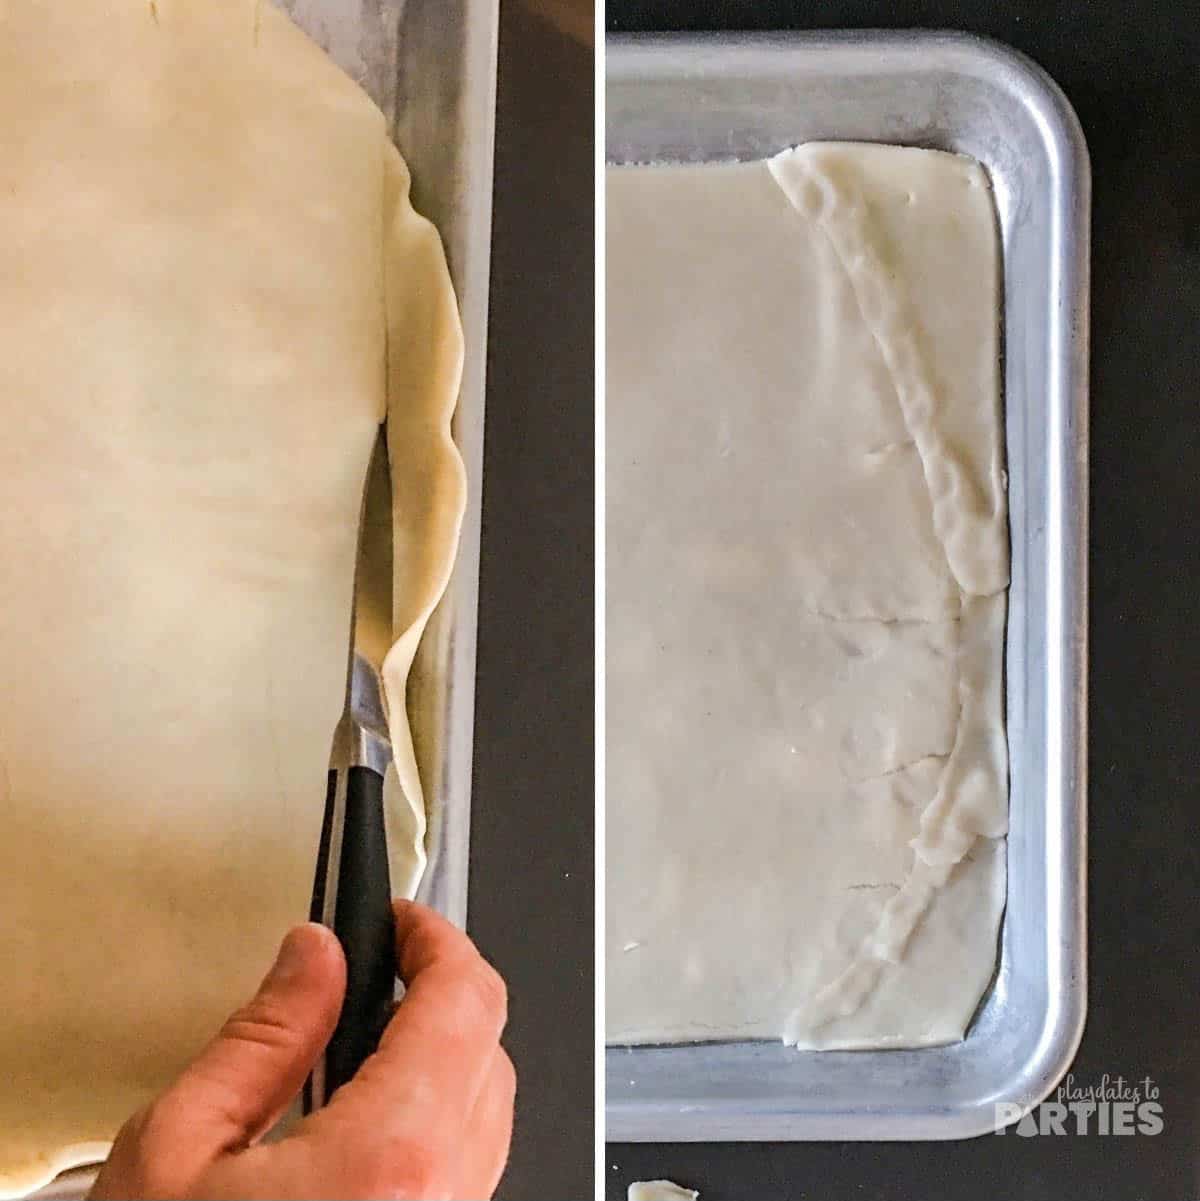 Trimming pie crust to fit a sheet pan.